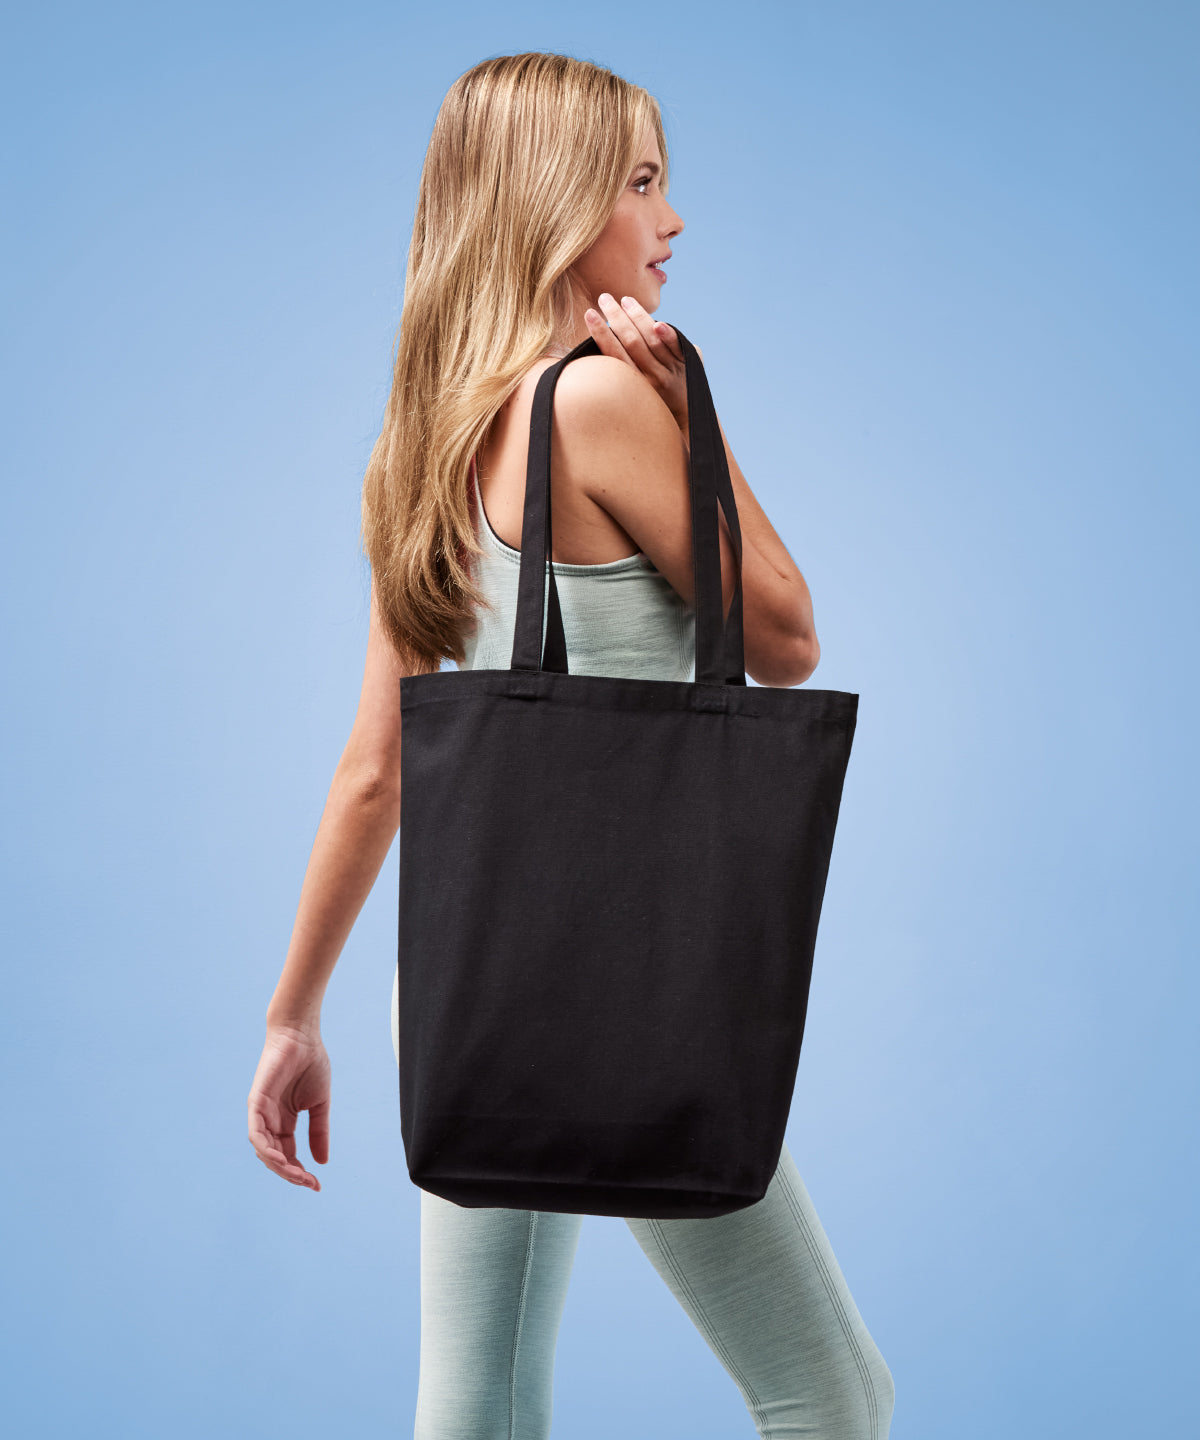 Recycled Premium Canvas Tote Bag with base panel